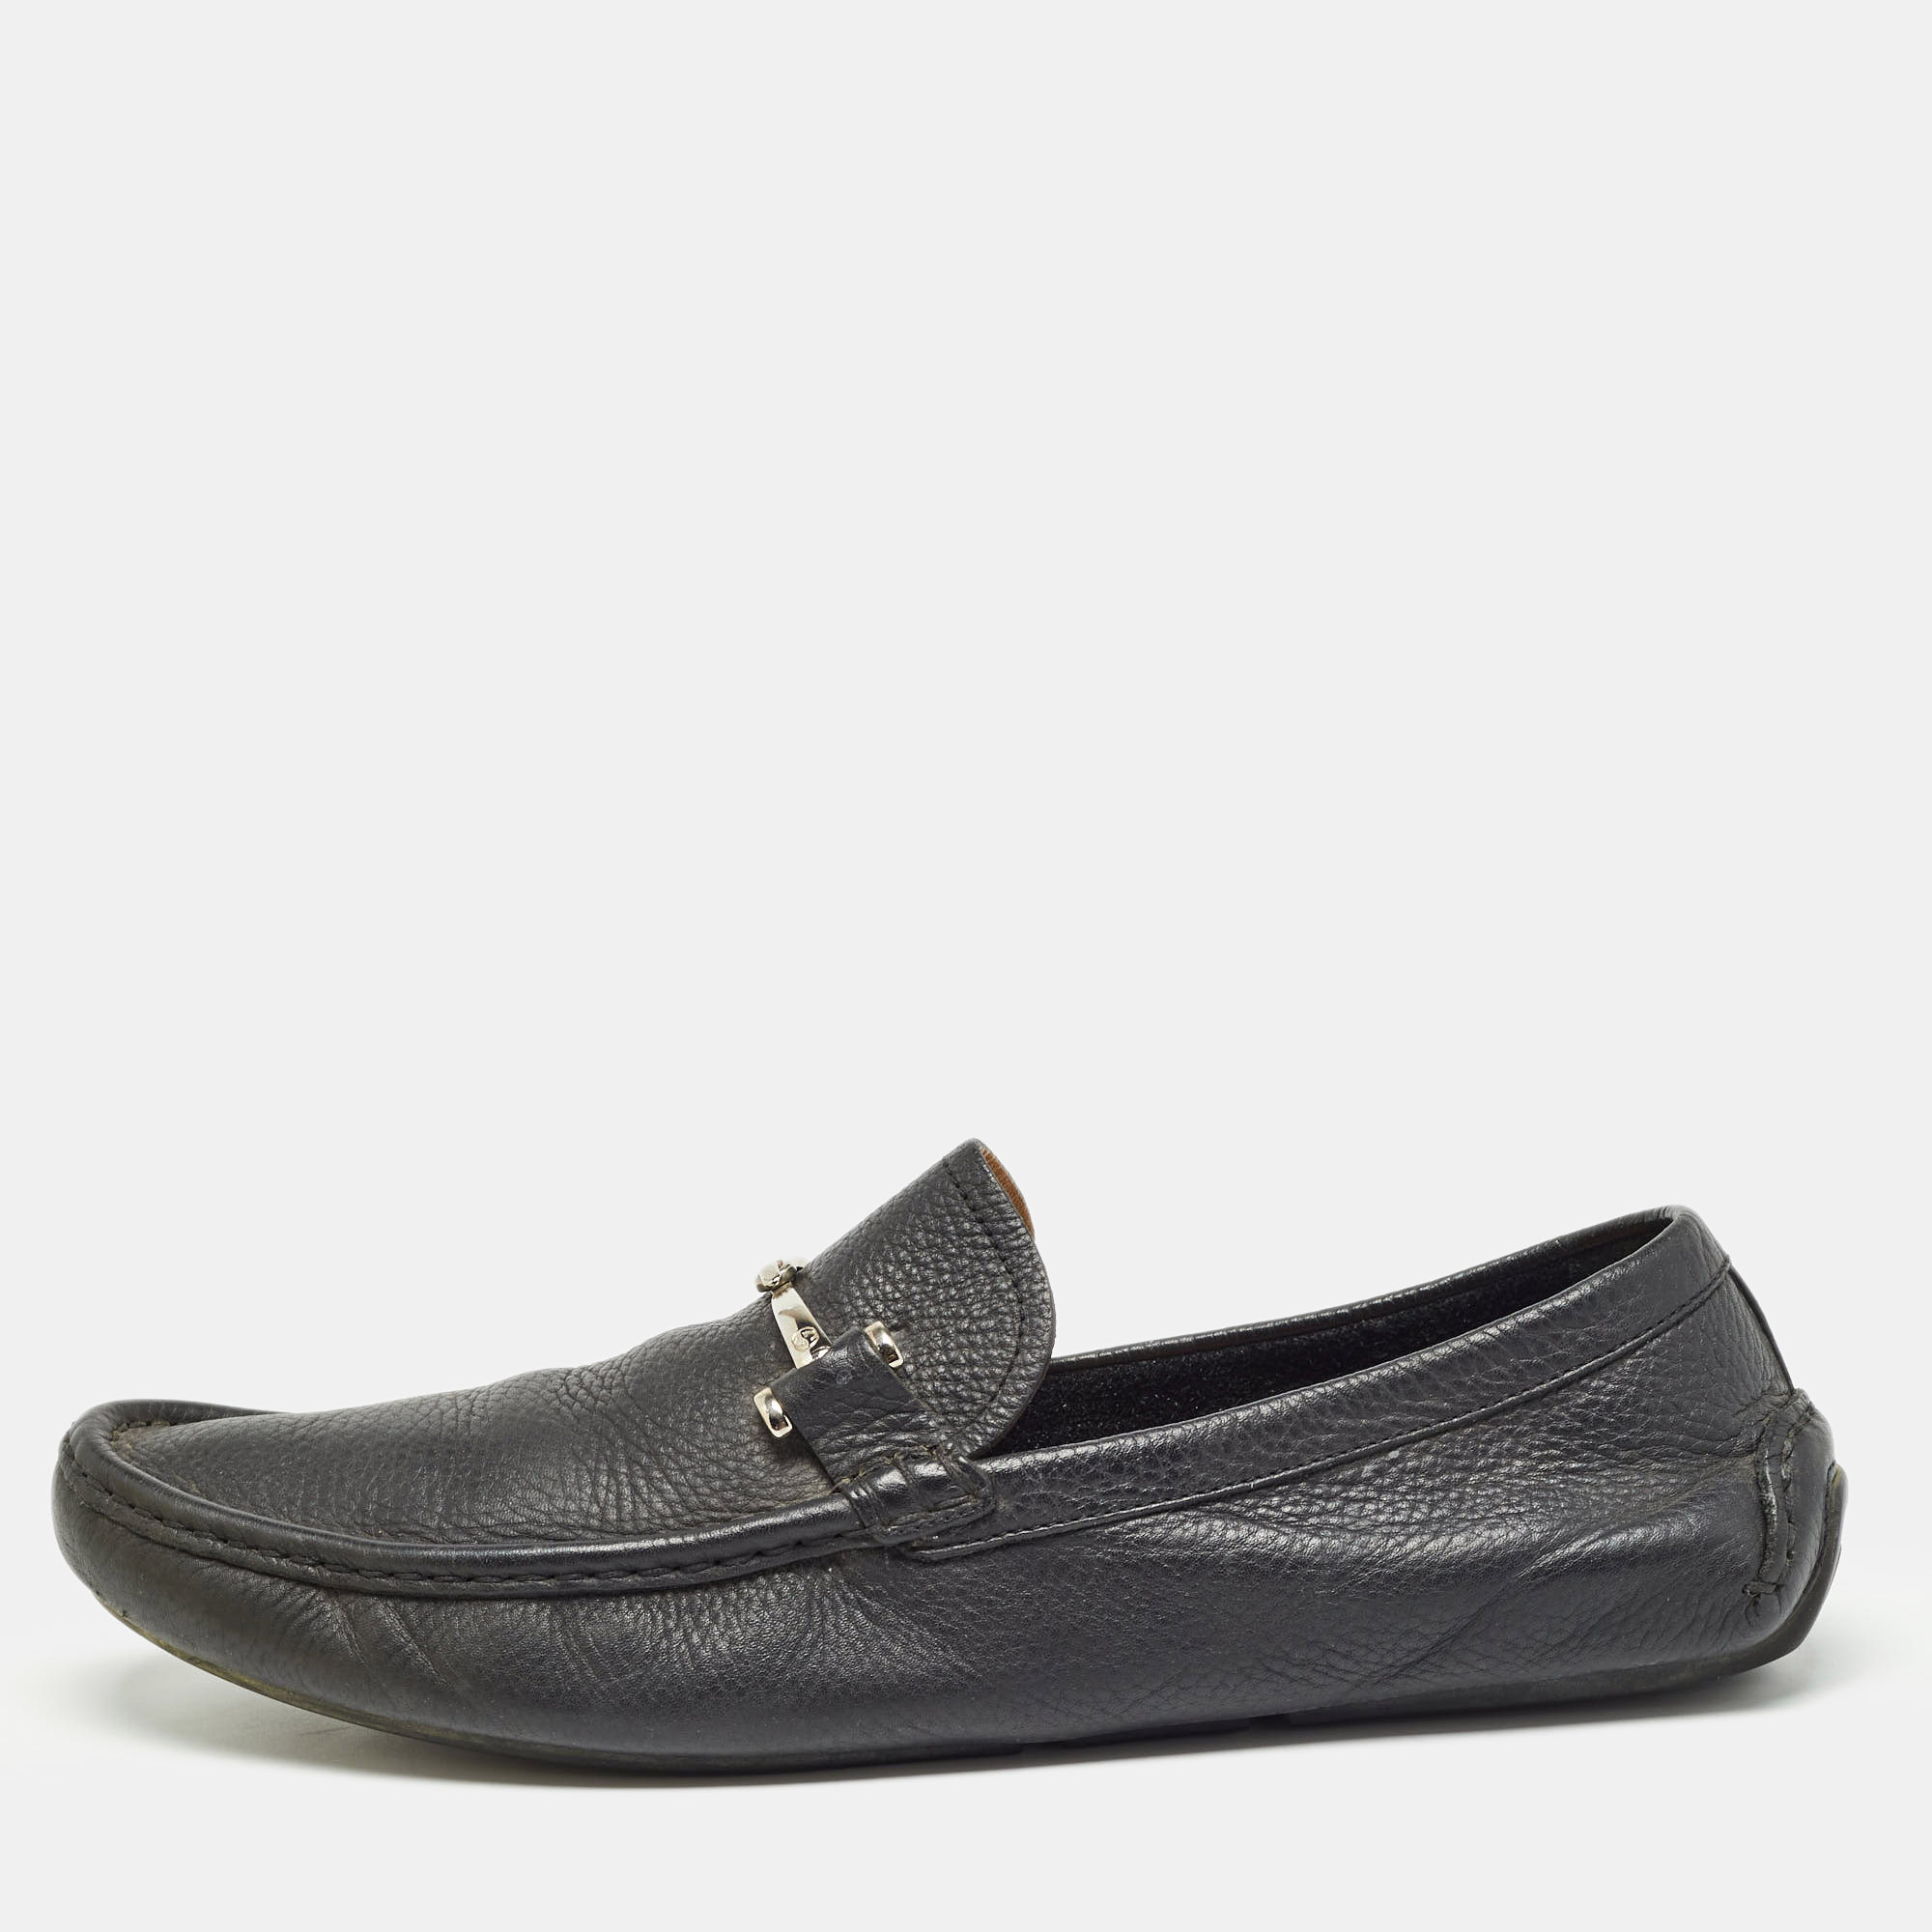 Gucci black leather slip on loafers size 44